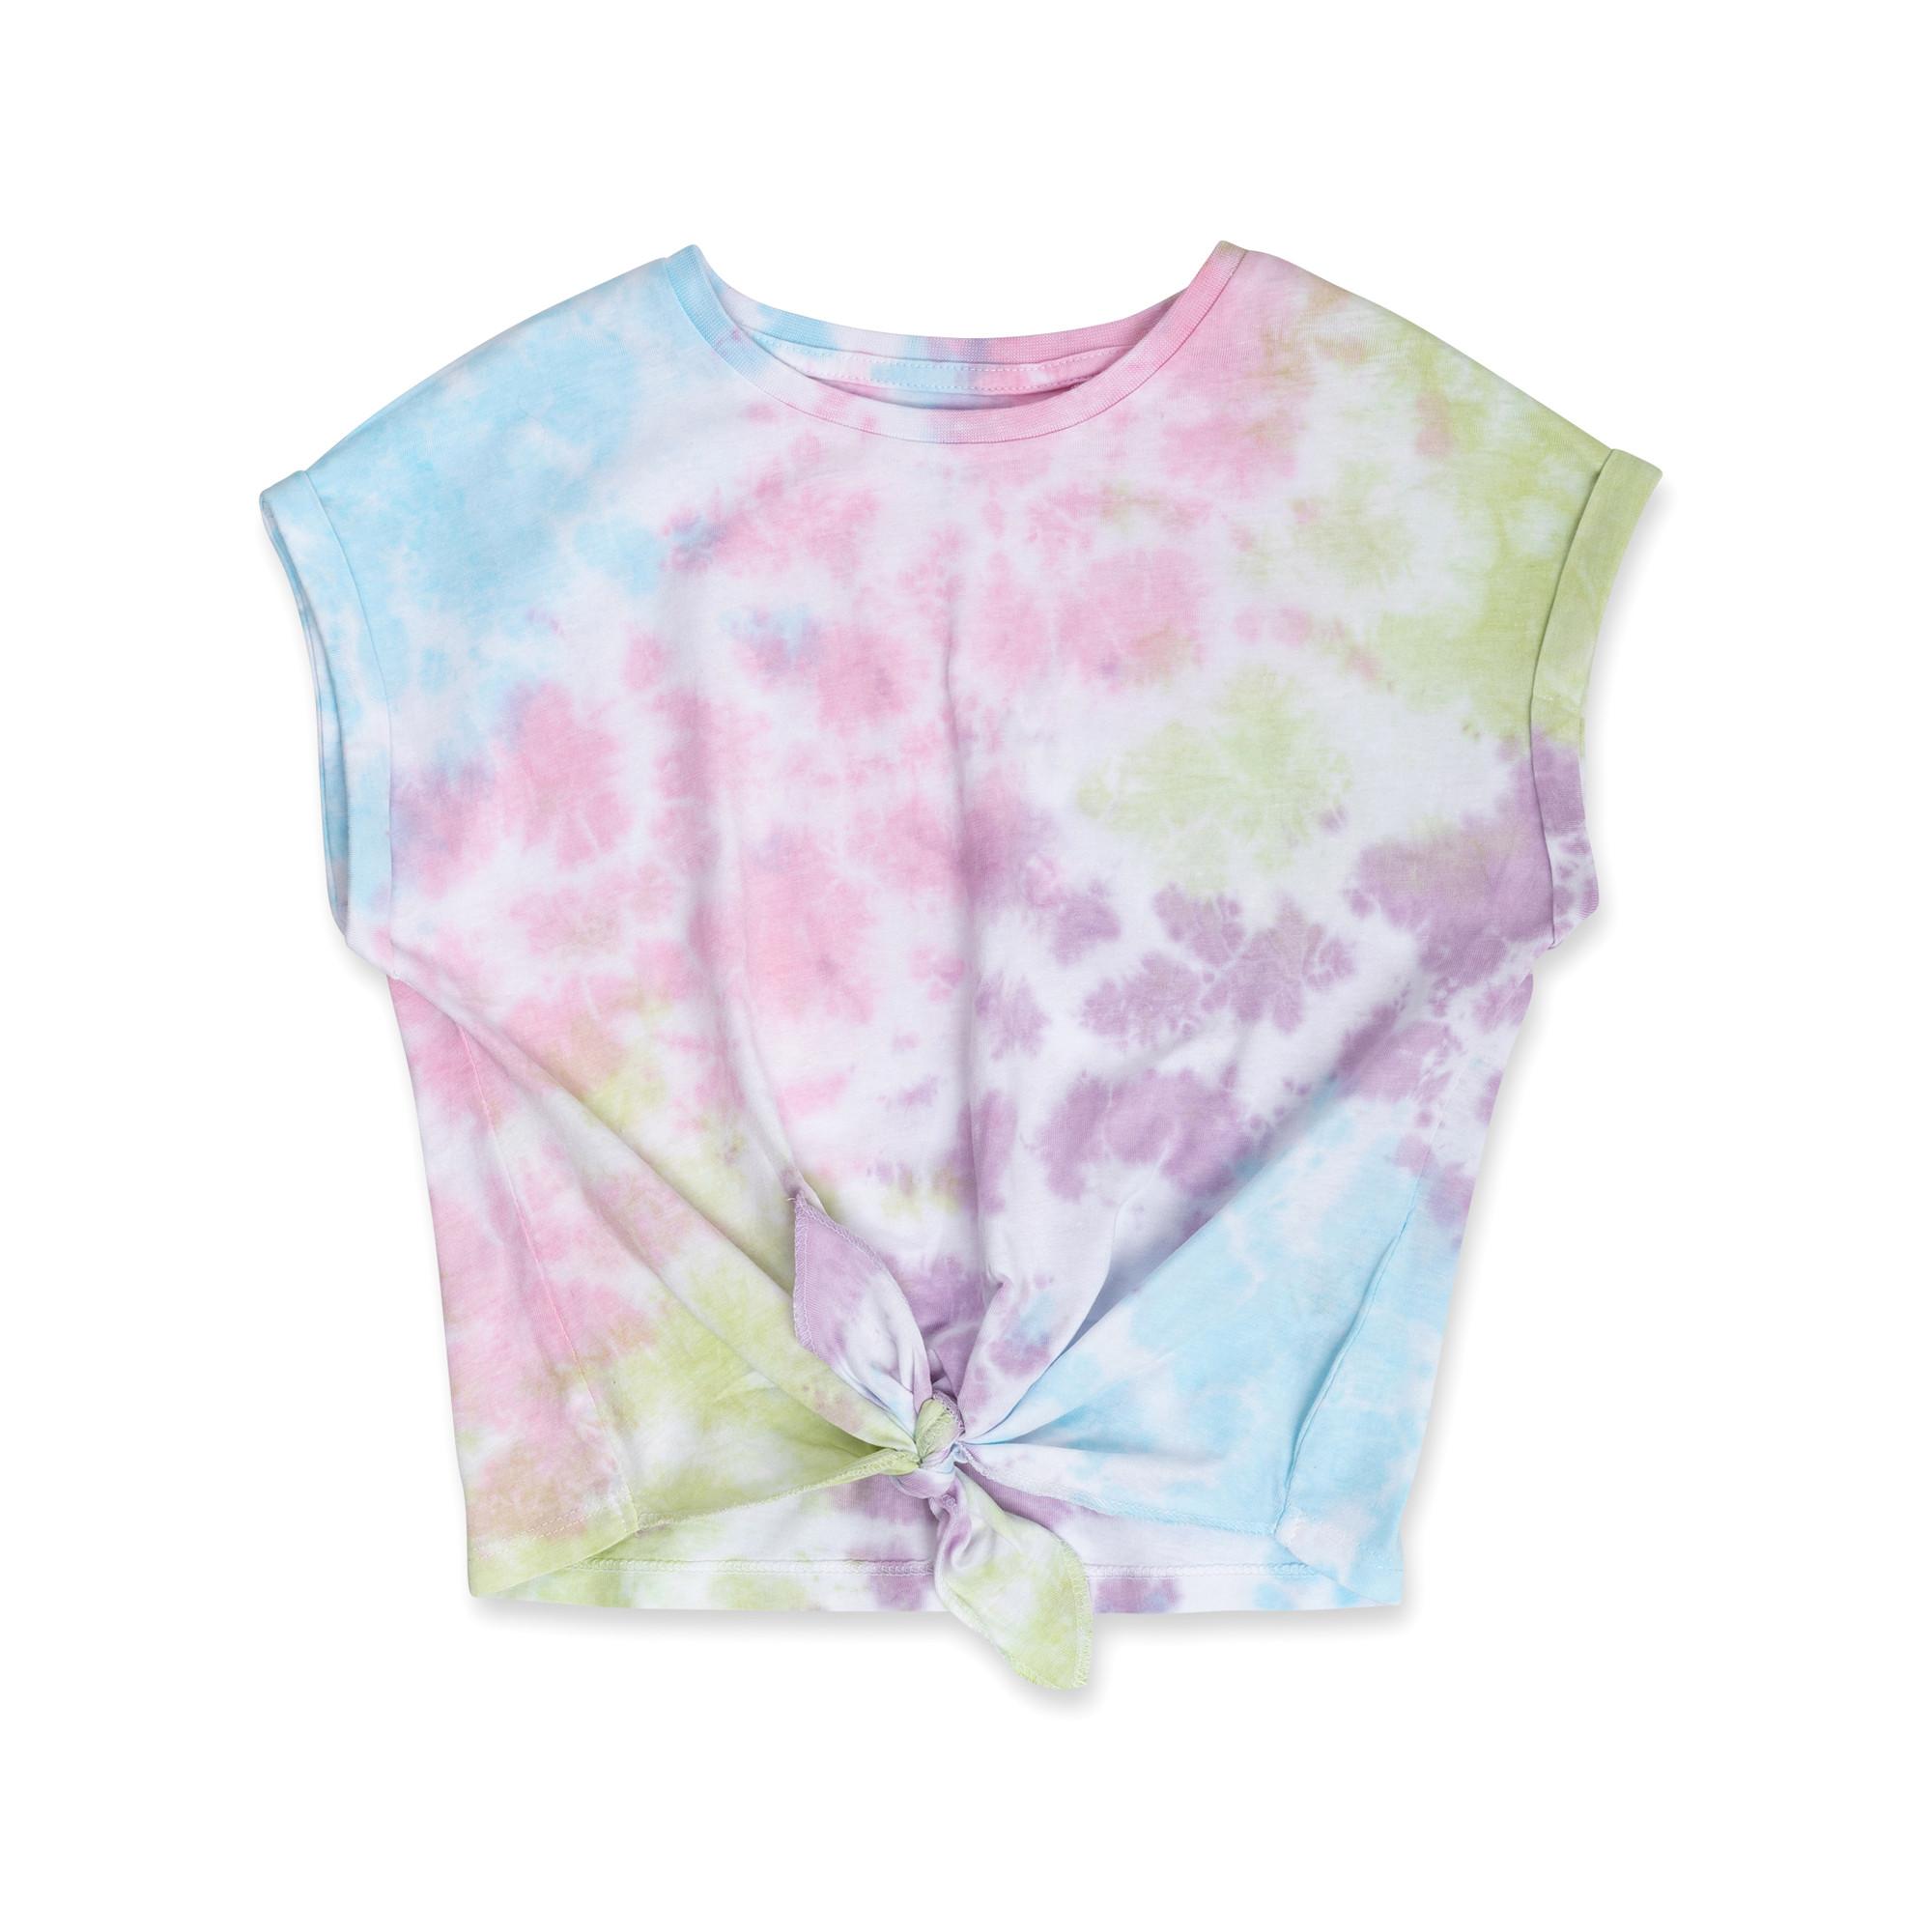 Manor Kids  Cropped Top 